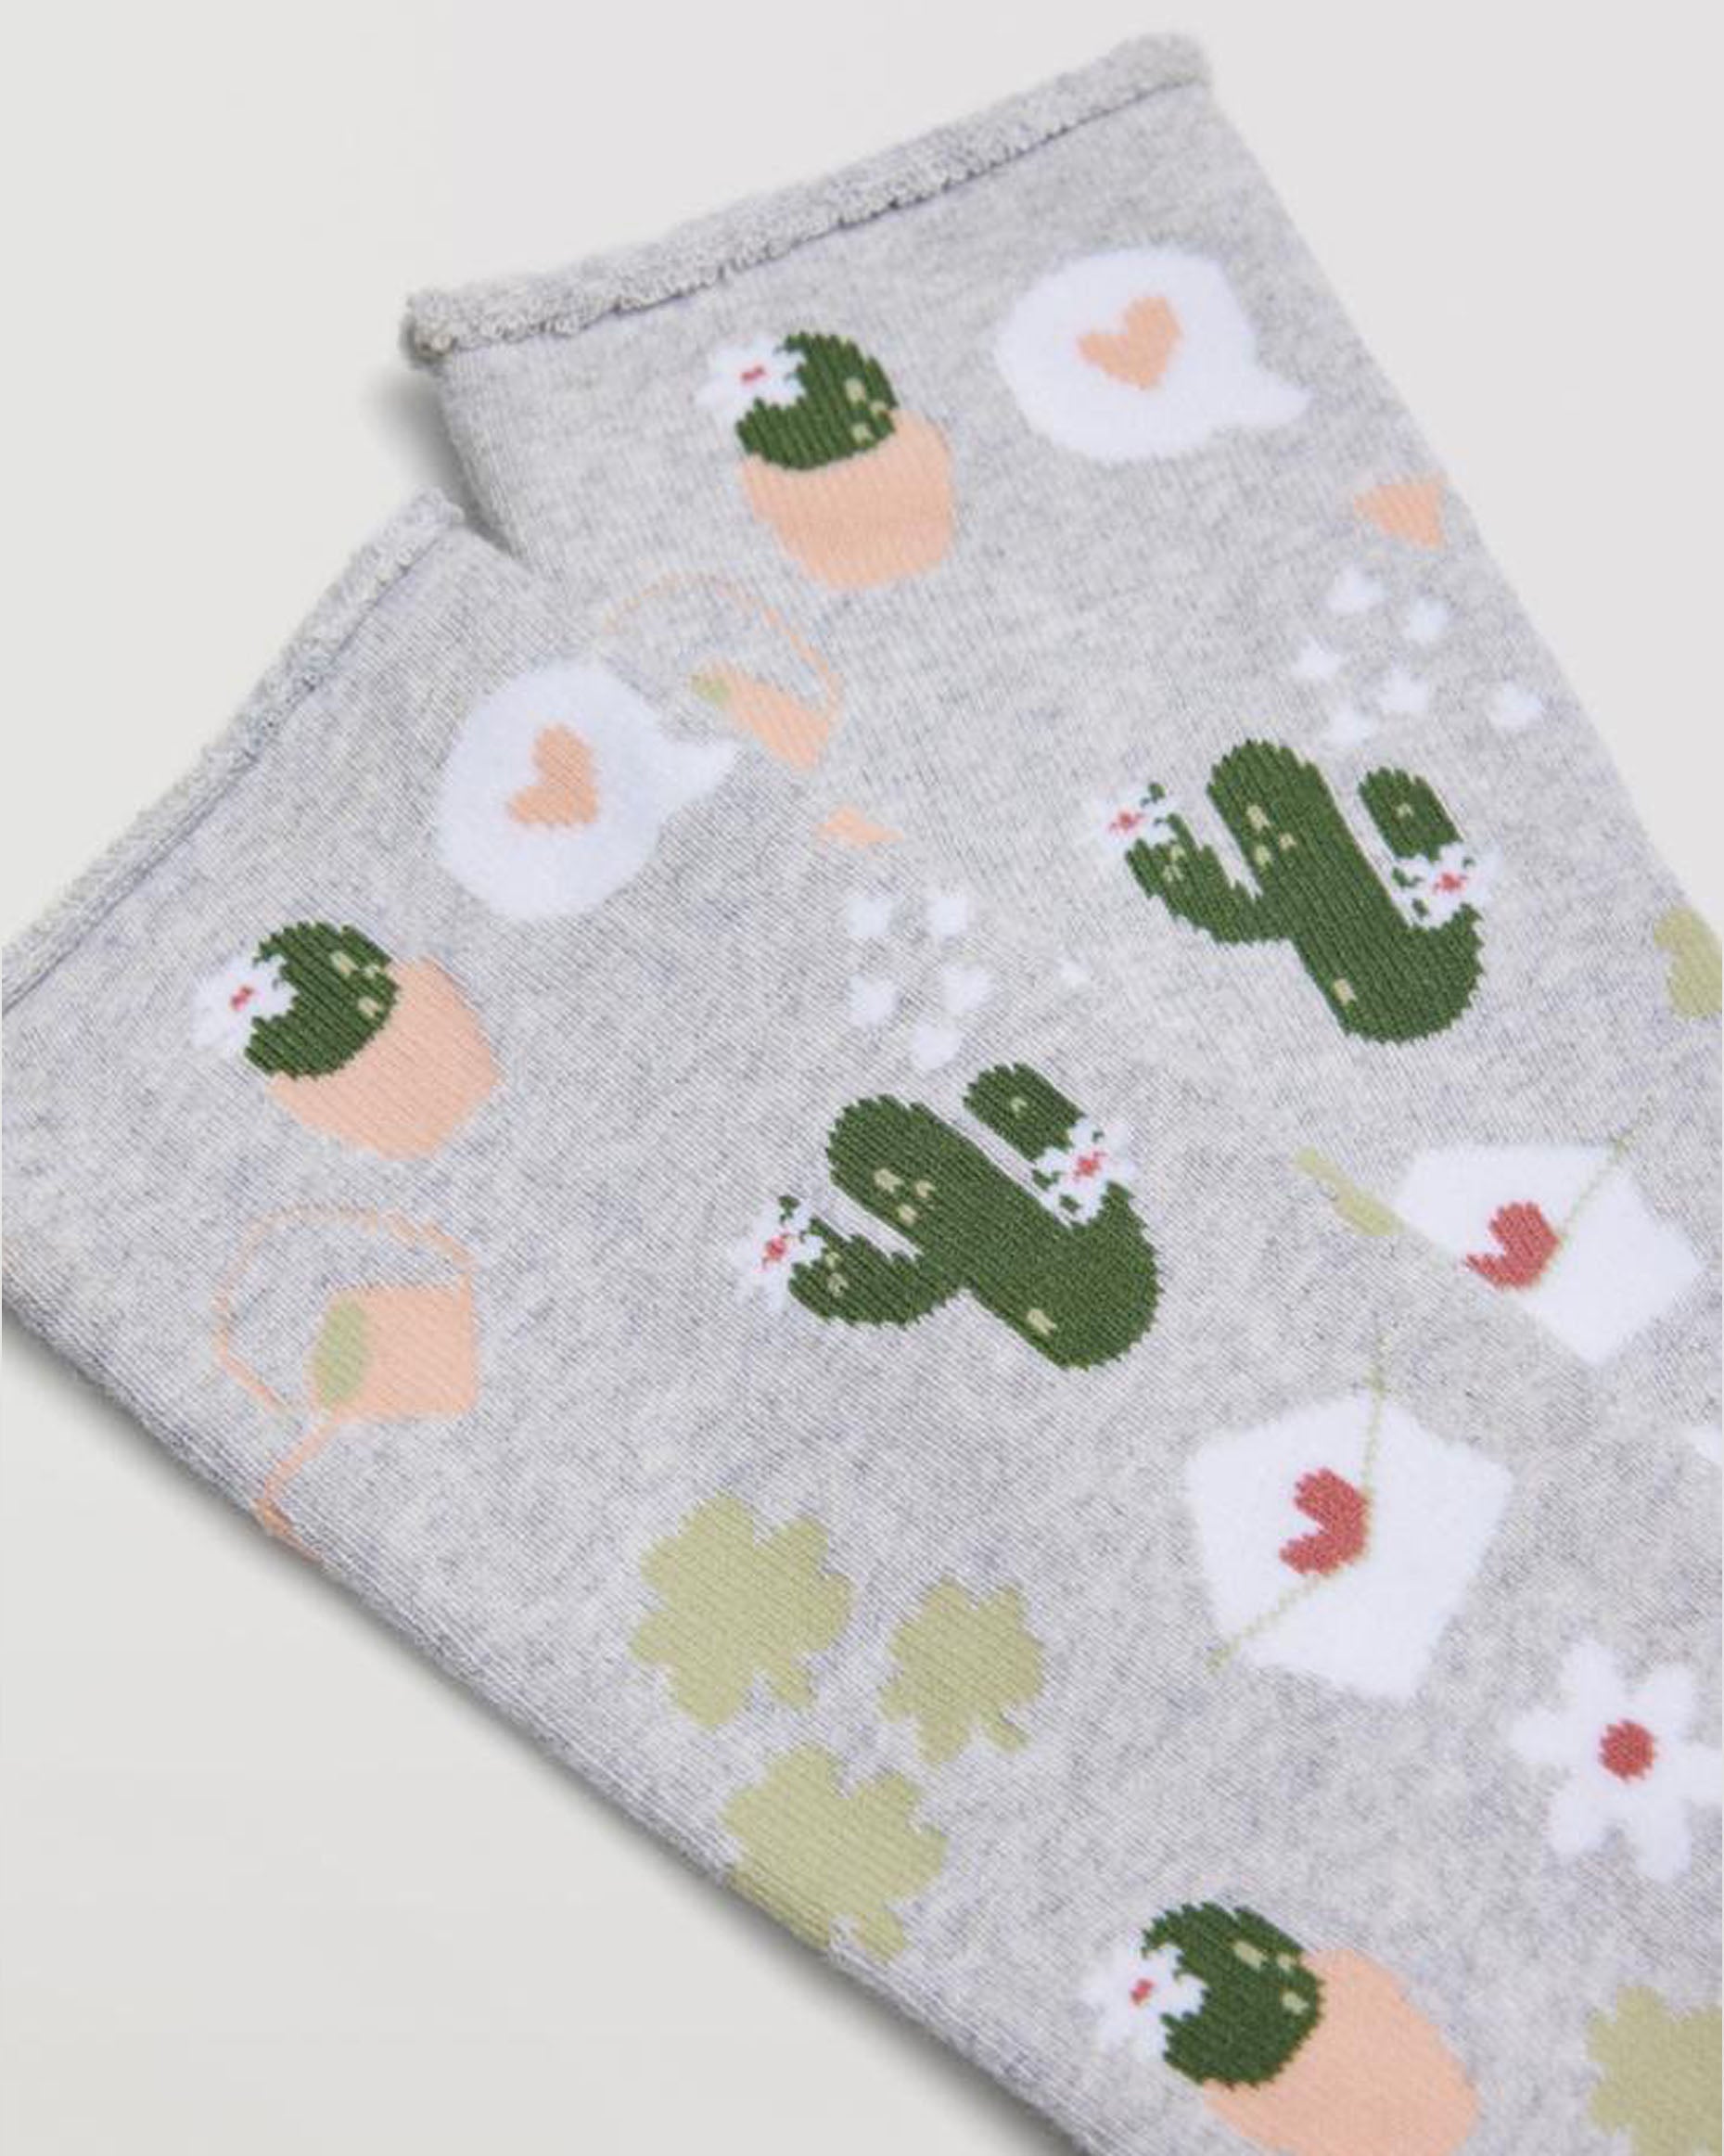 Ysabel Mora 12885 Gardener Sock - Light grey cotton thermal socks with a terry lining and all over gardener themed pattern in shades of green, pink, peach and white, shaped heel and no cuff comfort top.